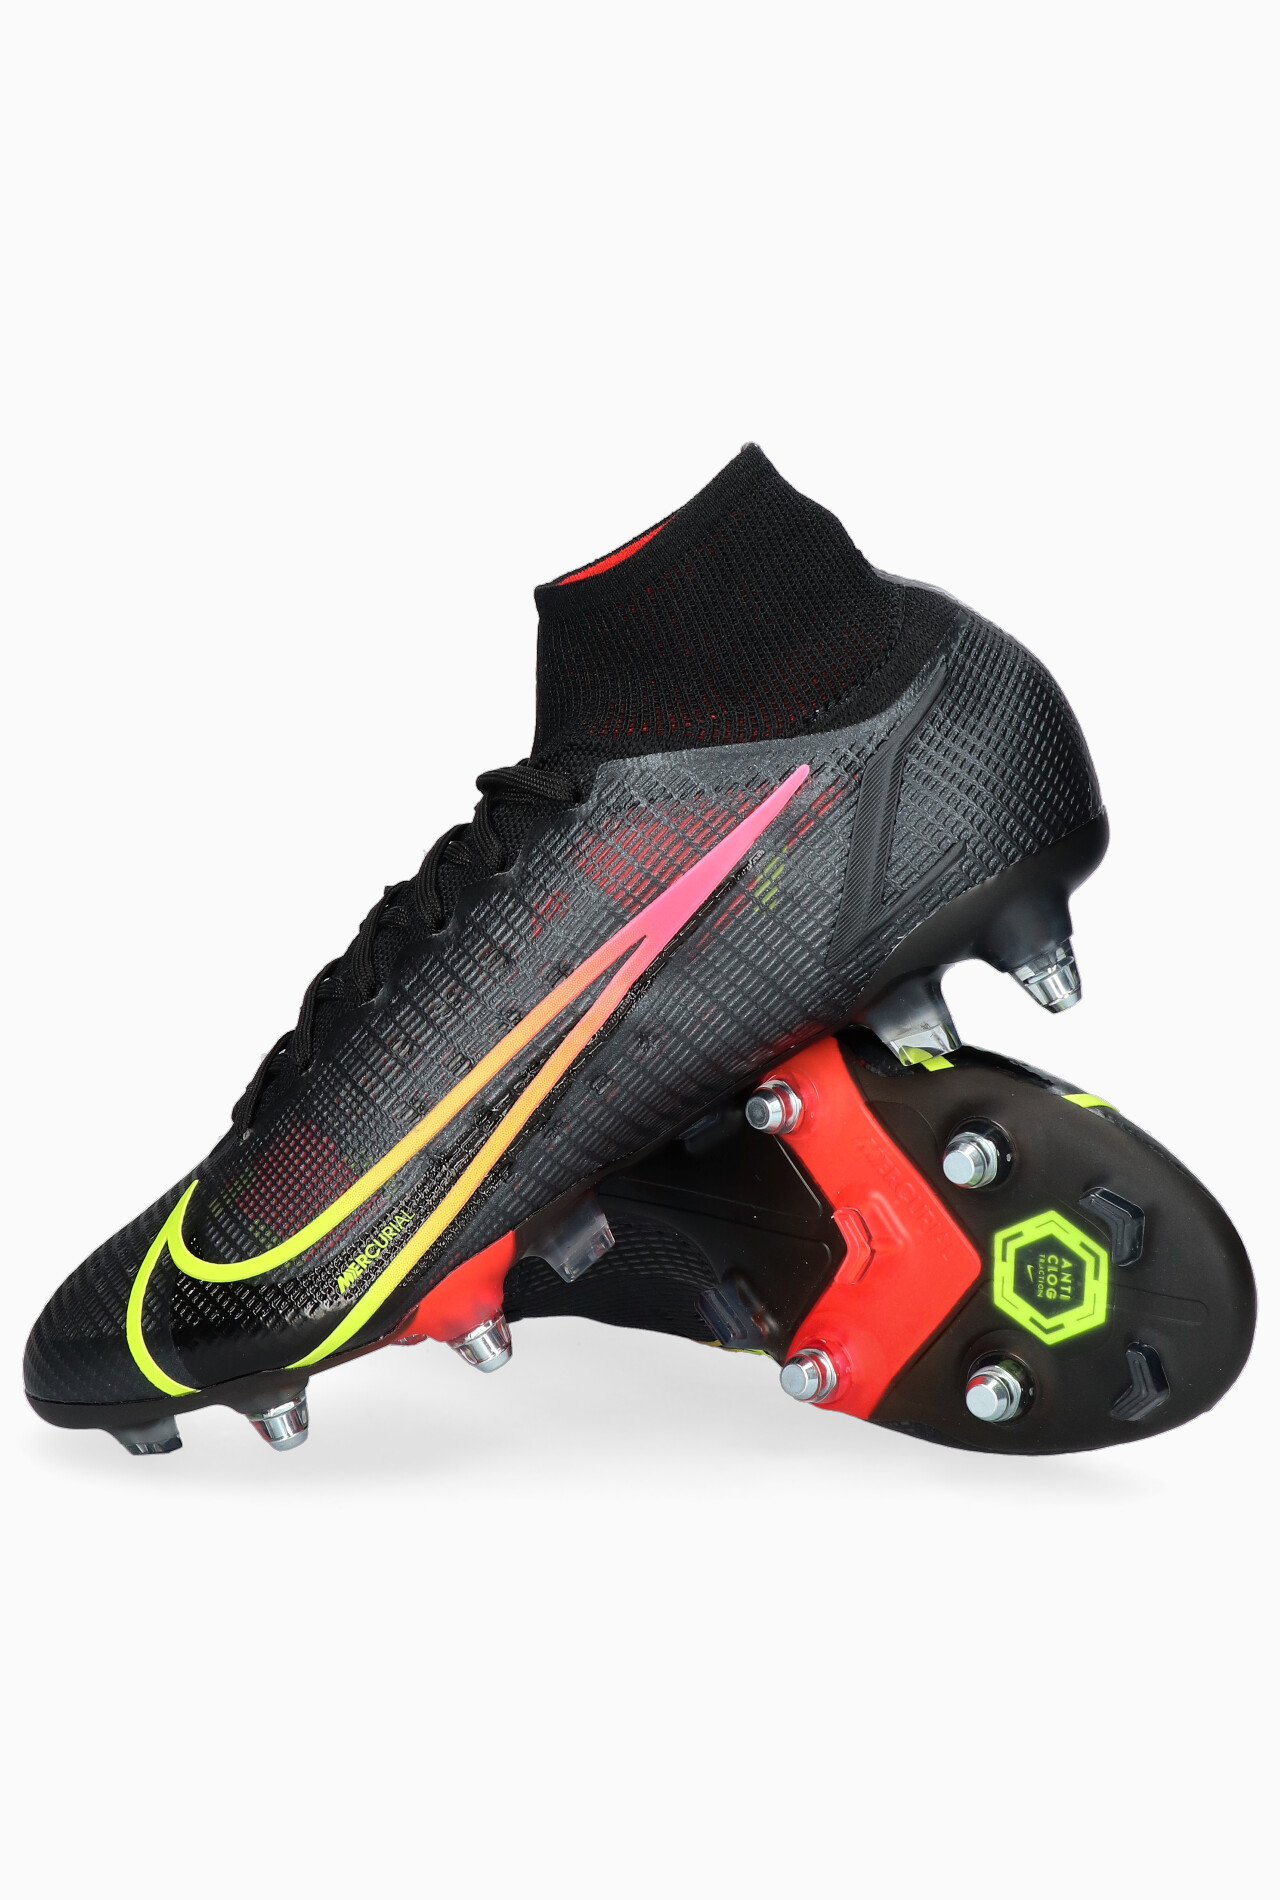 sg pro soccer cleats